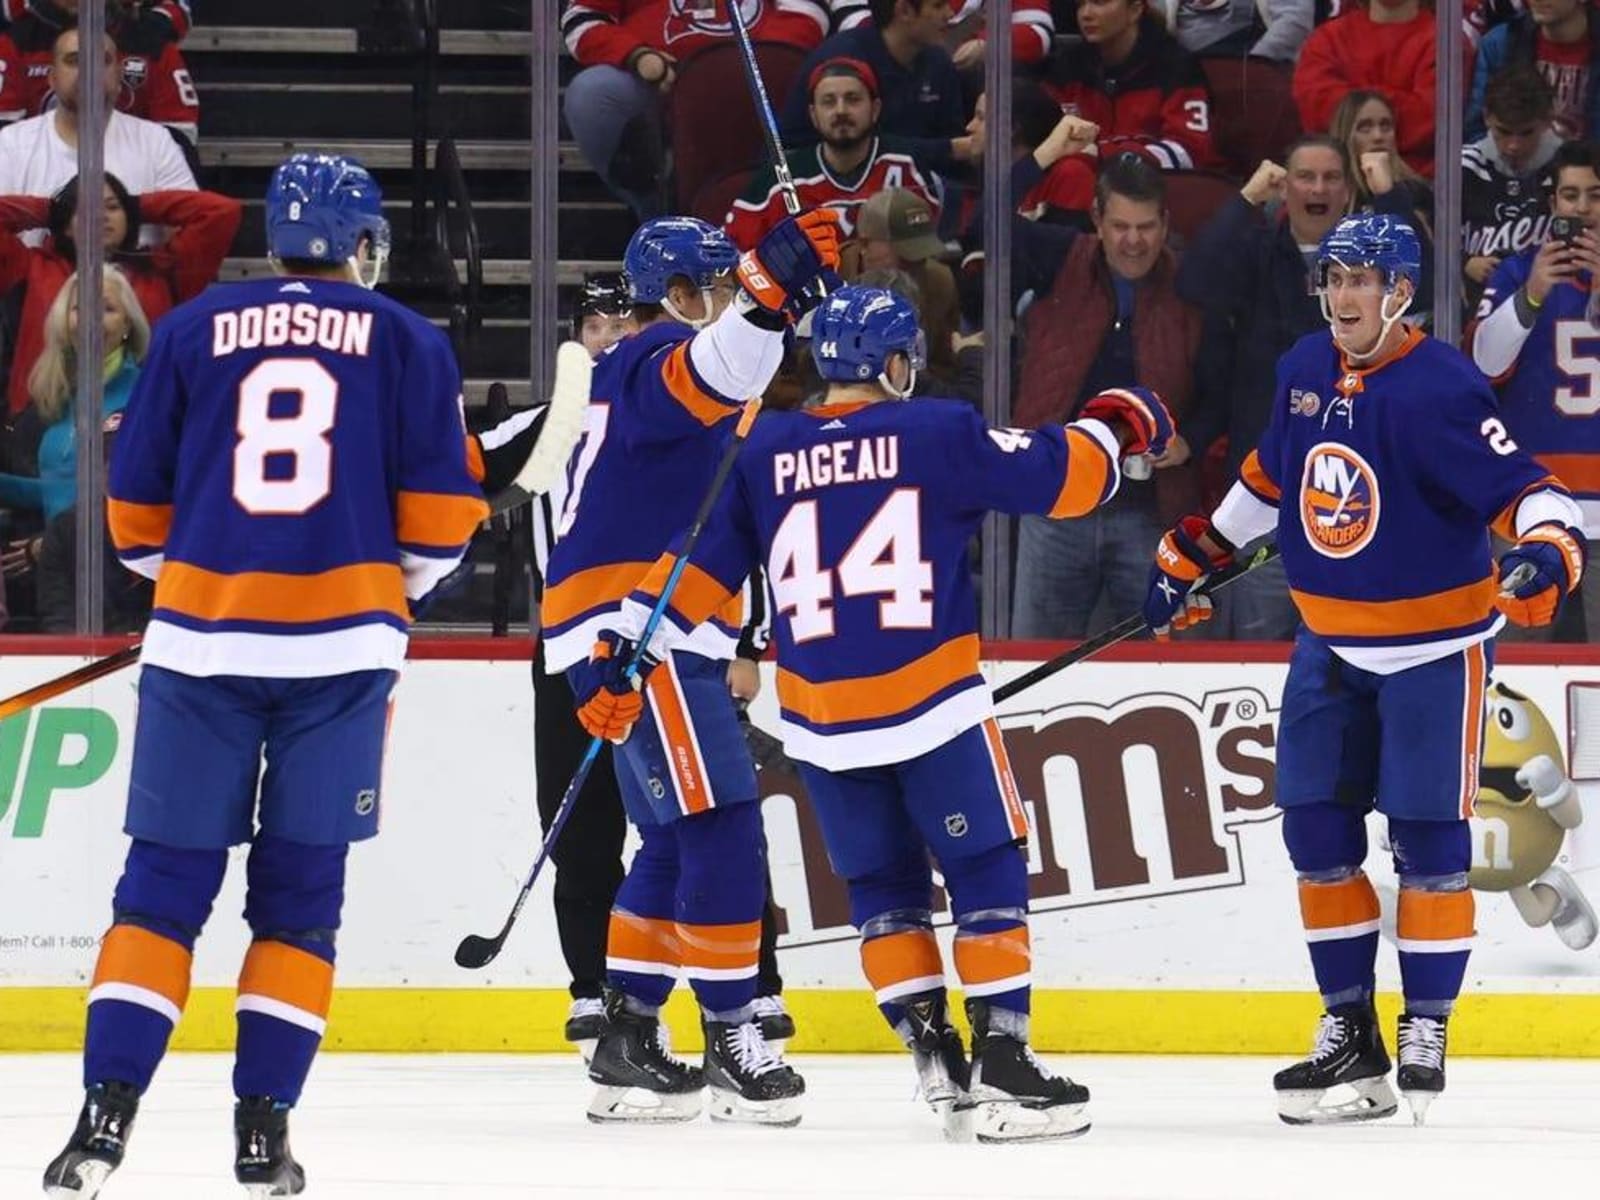 Nelson scores 2 to lead Islanders to 6-4 win over Devils